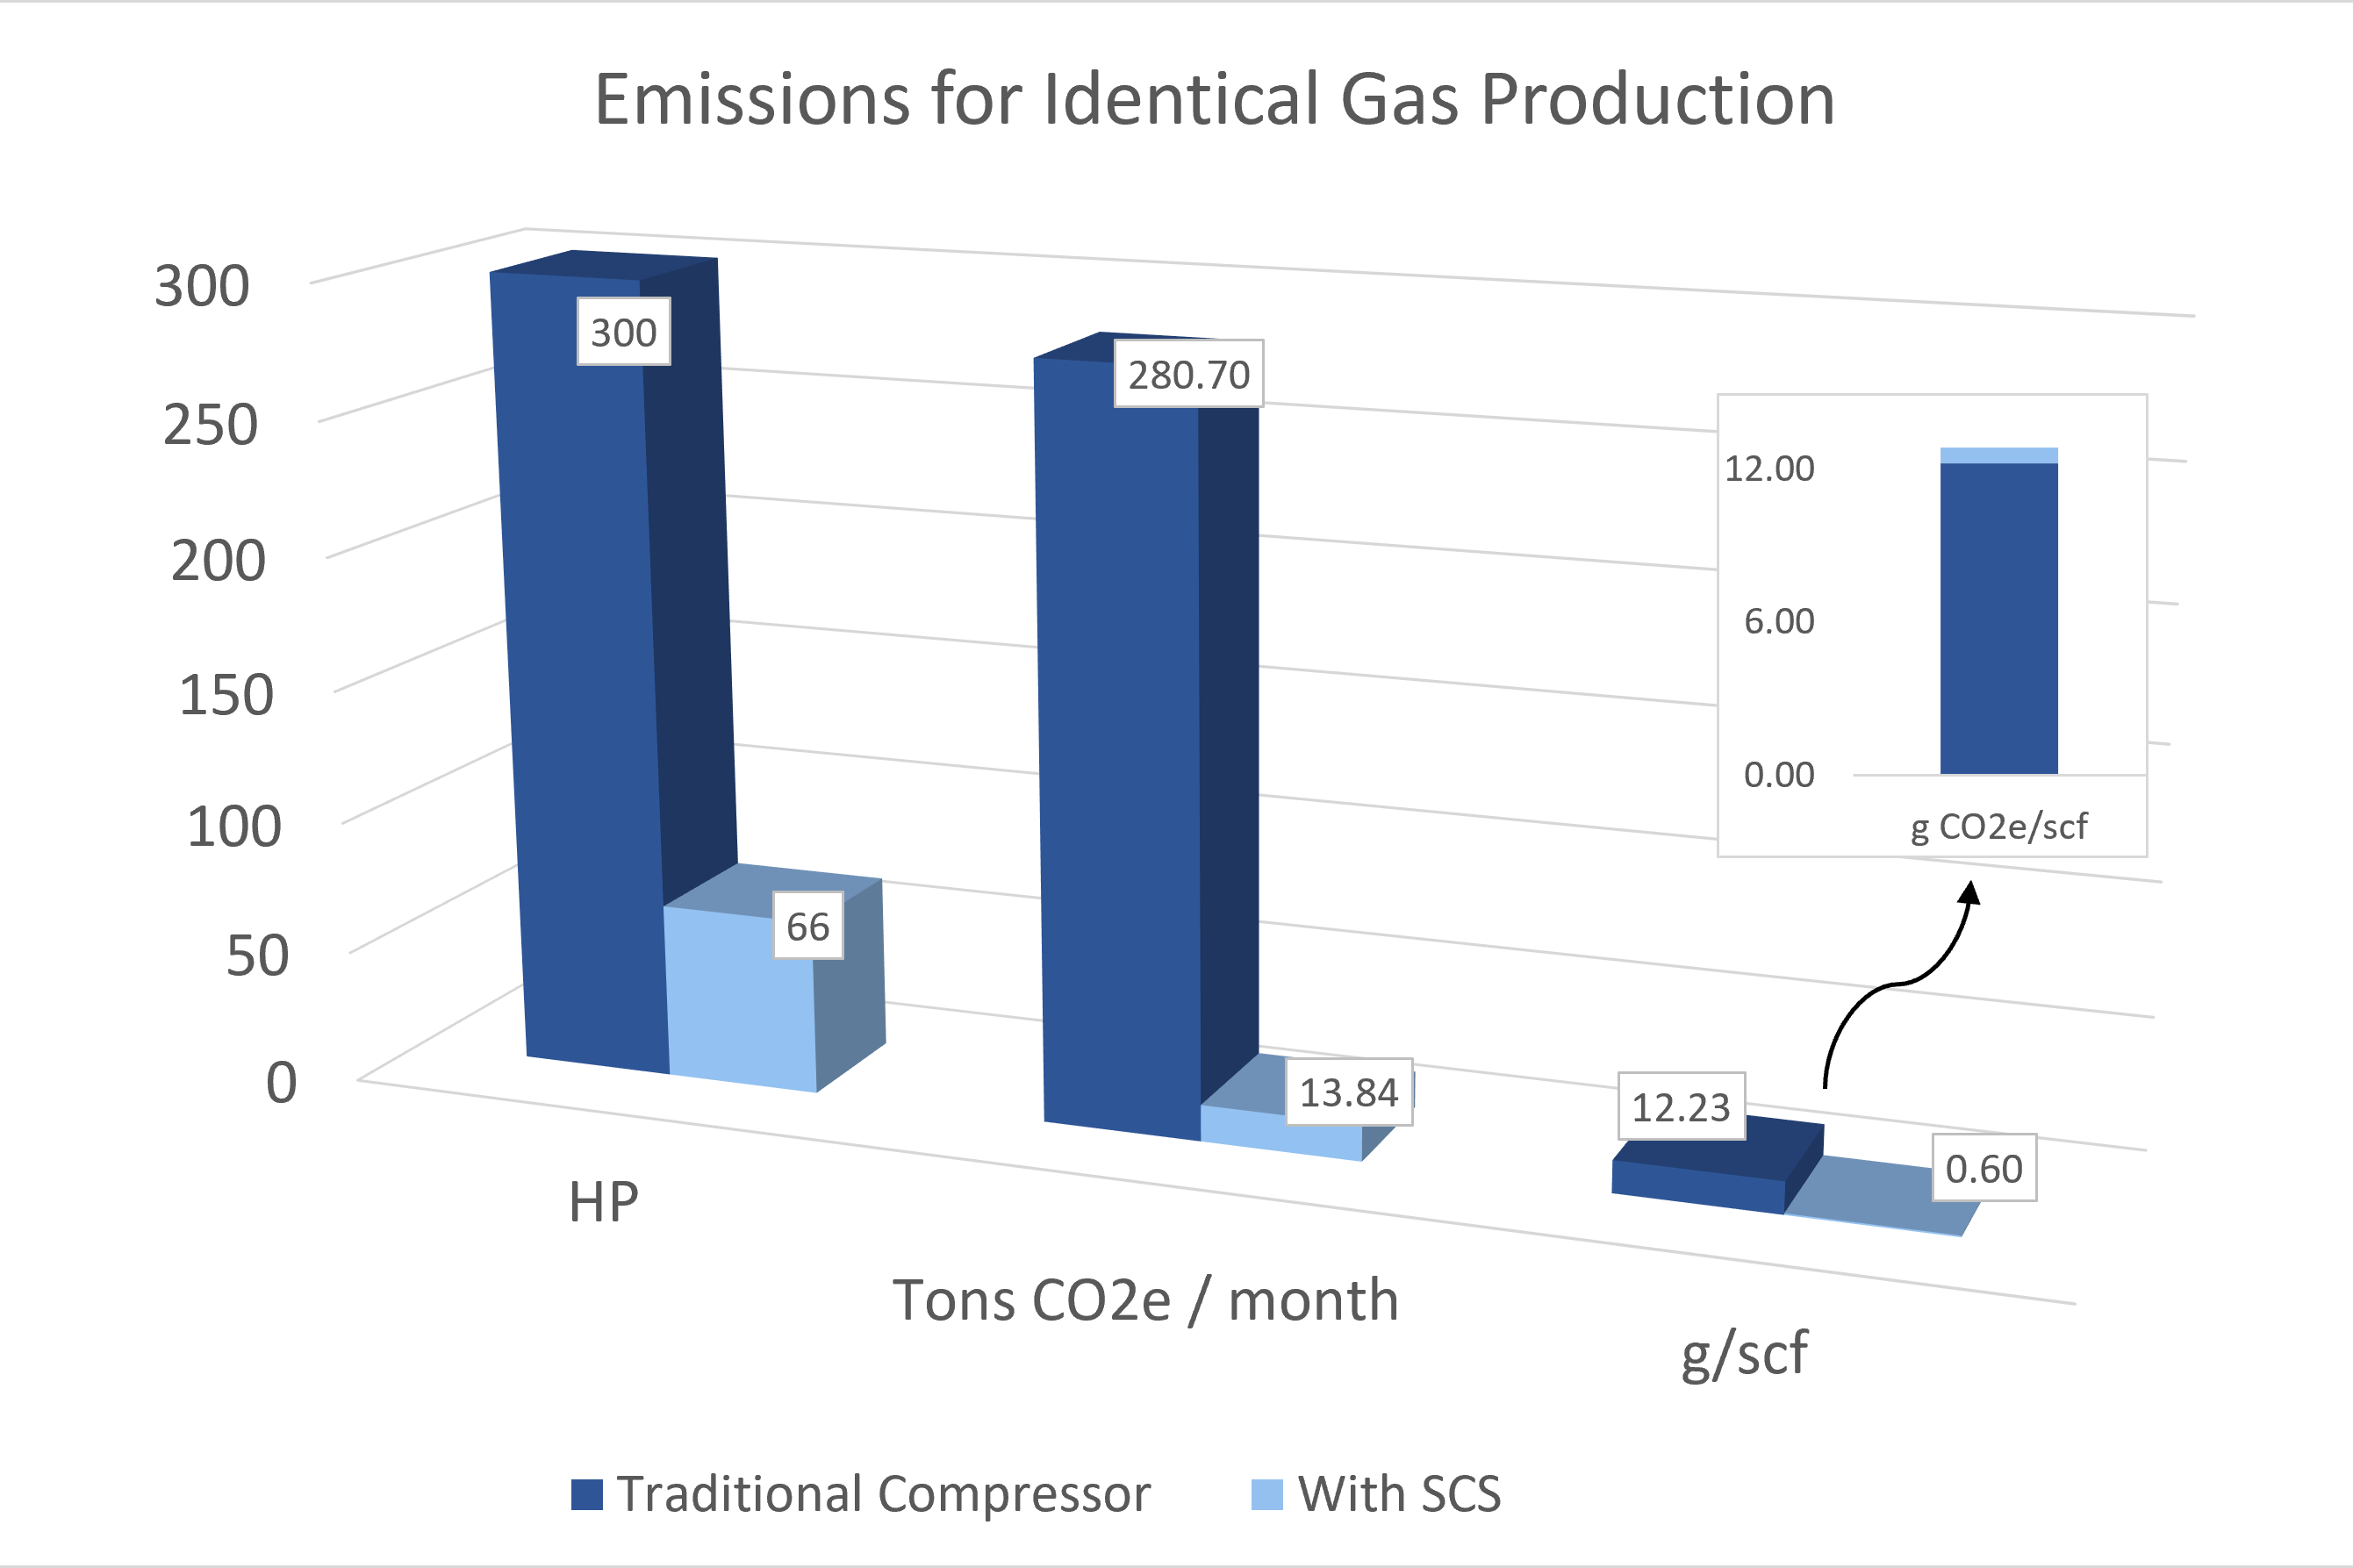 Emissions for identical natural gas production